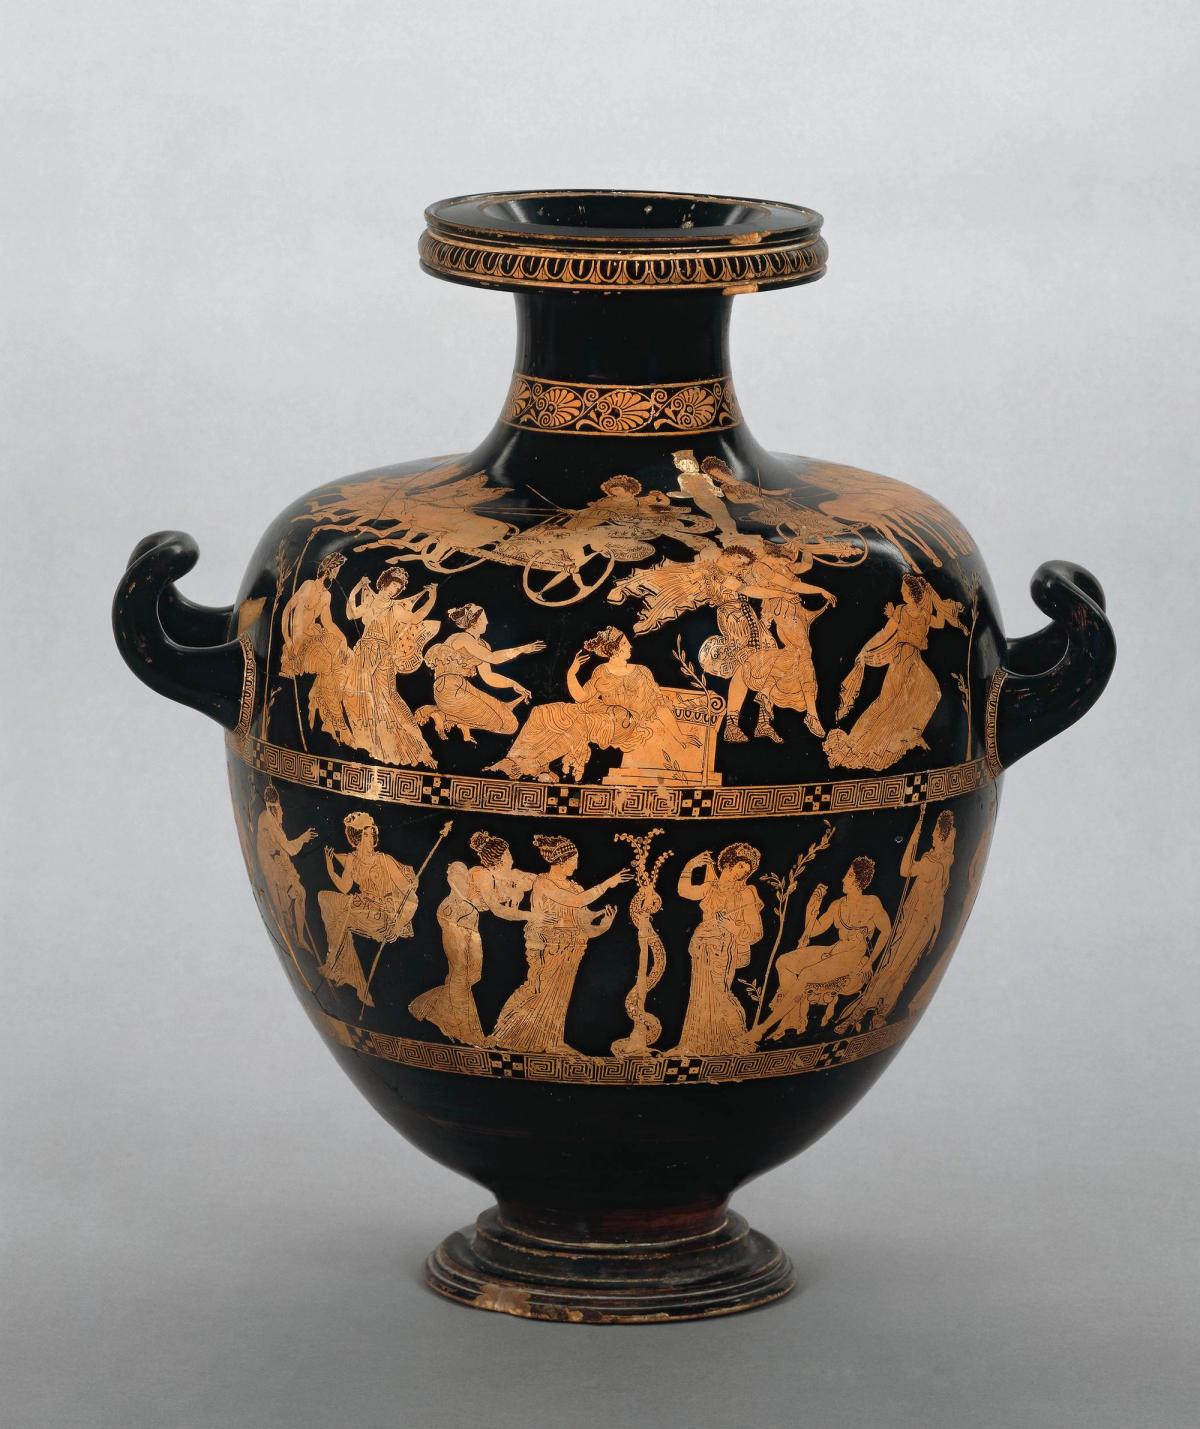 Meidias Hydria, Athenian red-figure hydria (water vase) signed by Meidias, about 420 BC, excavated in Italy

© Trustees of the British Museum